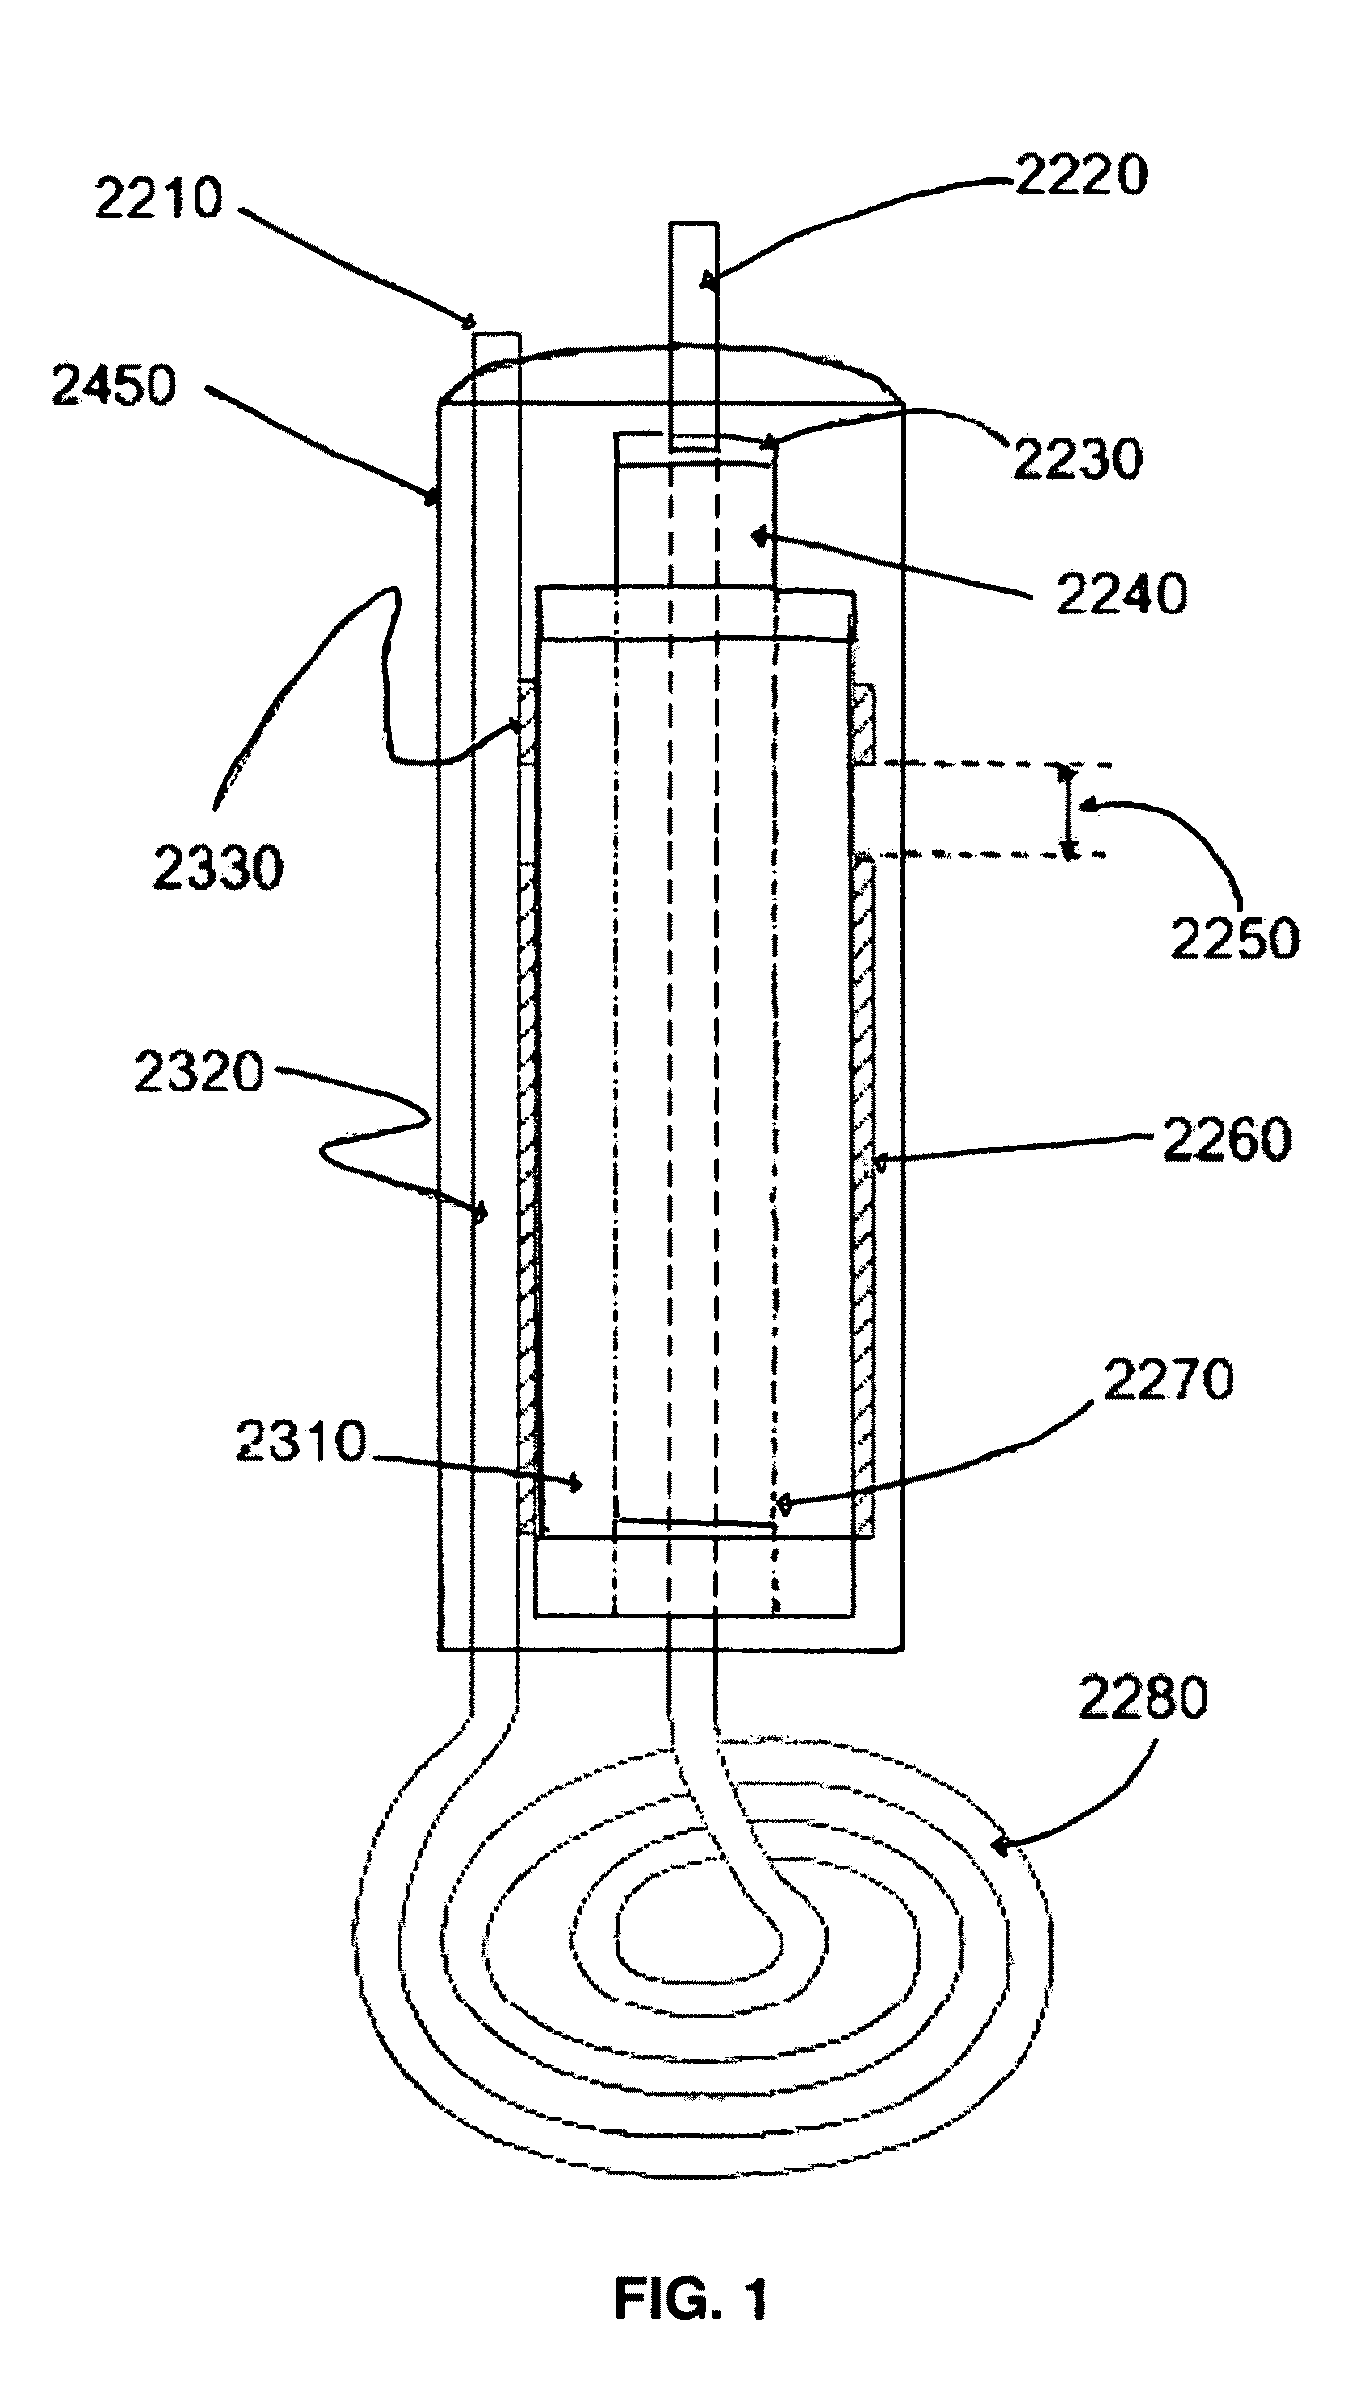 Inductive heating of tissues using alternating magnetic fields and uses thereof